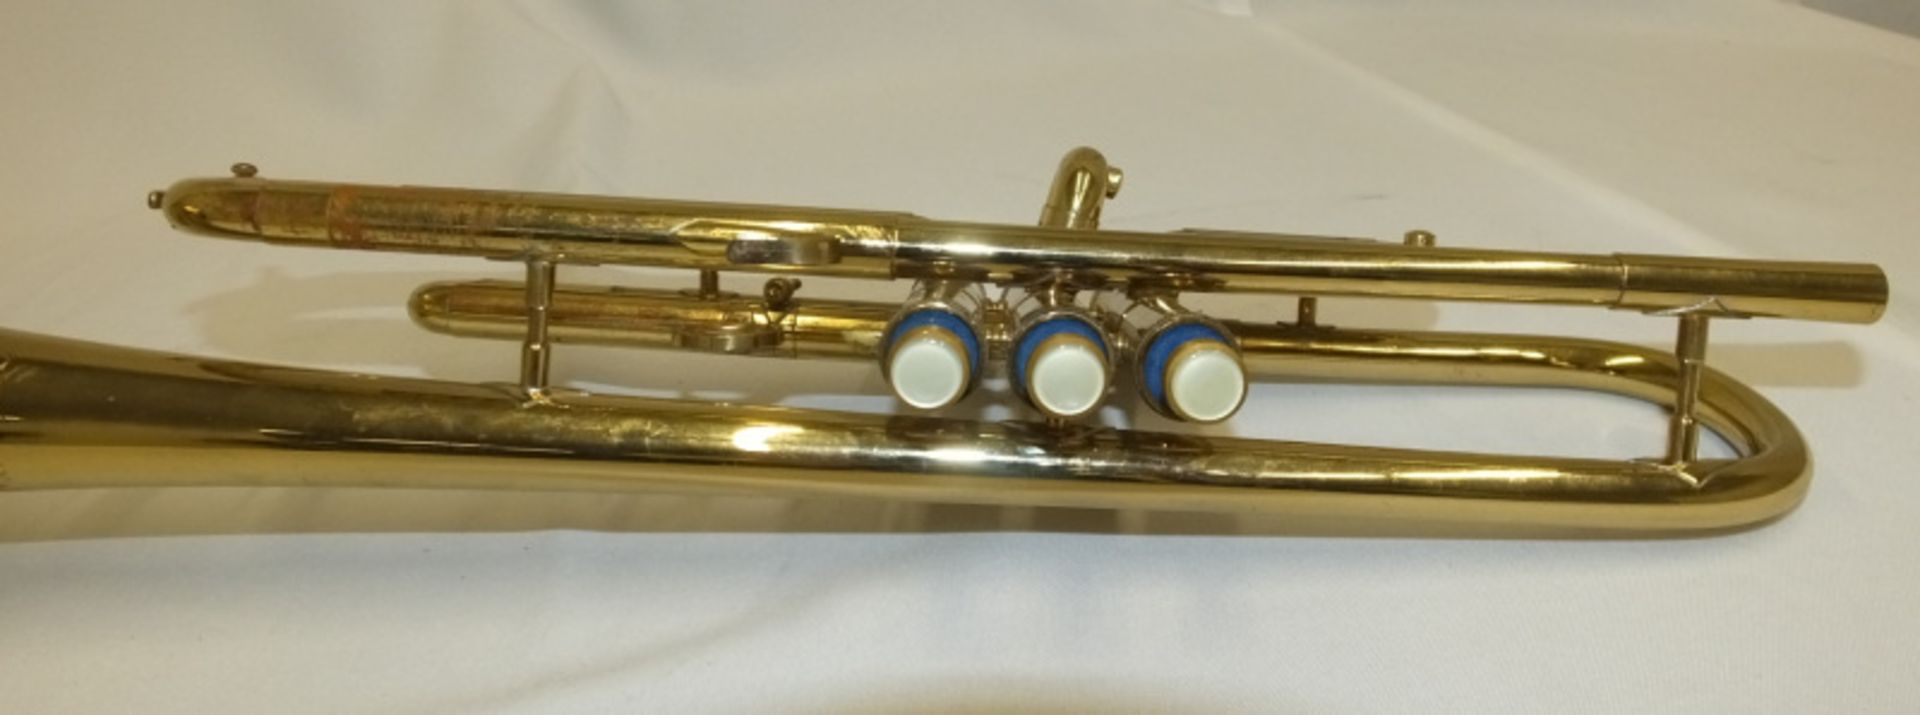 Corton 80 Trumpet in case - serial number 056228 - Please check photos carefully - Image 5 of 11